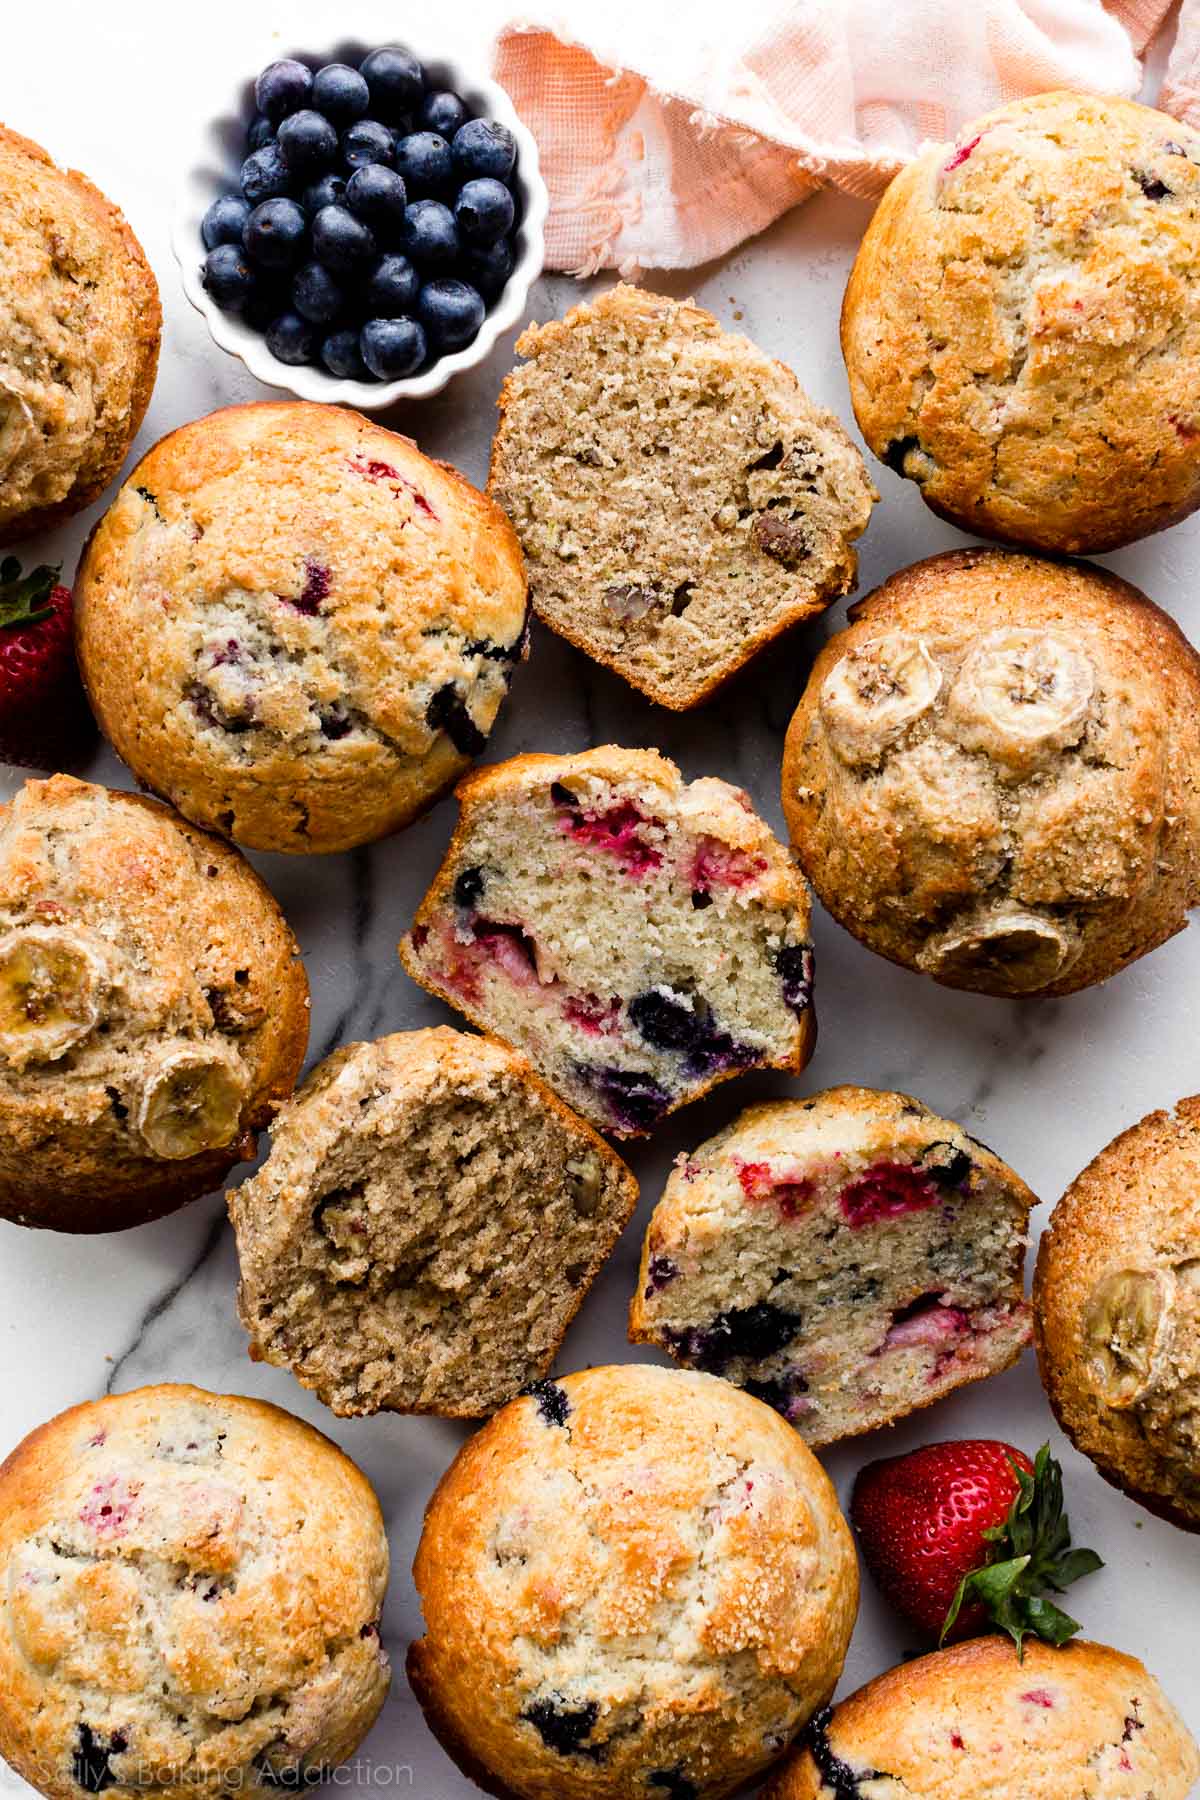 bakery style muffins including banana muffins and berry muffins